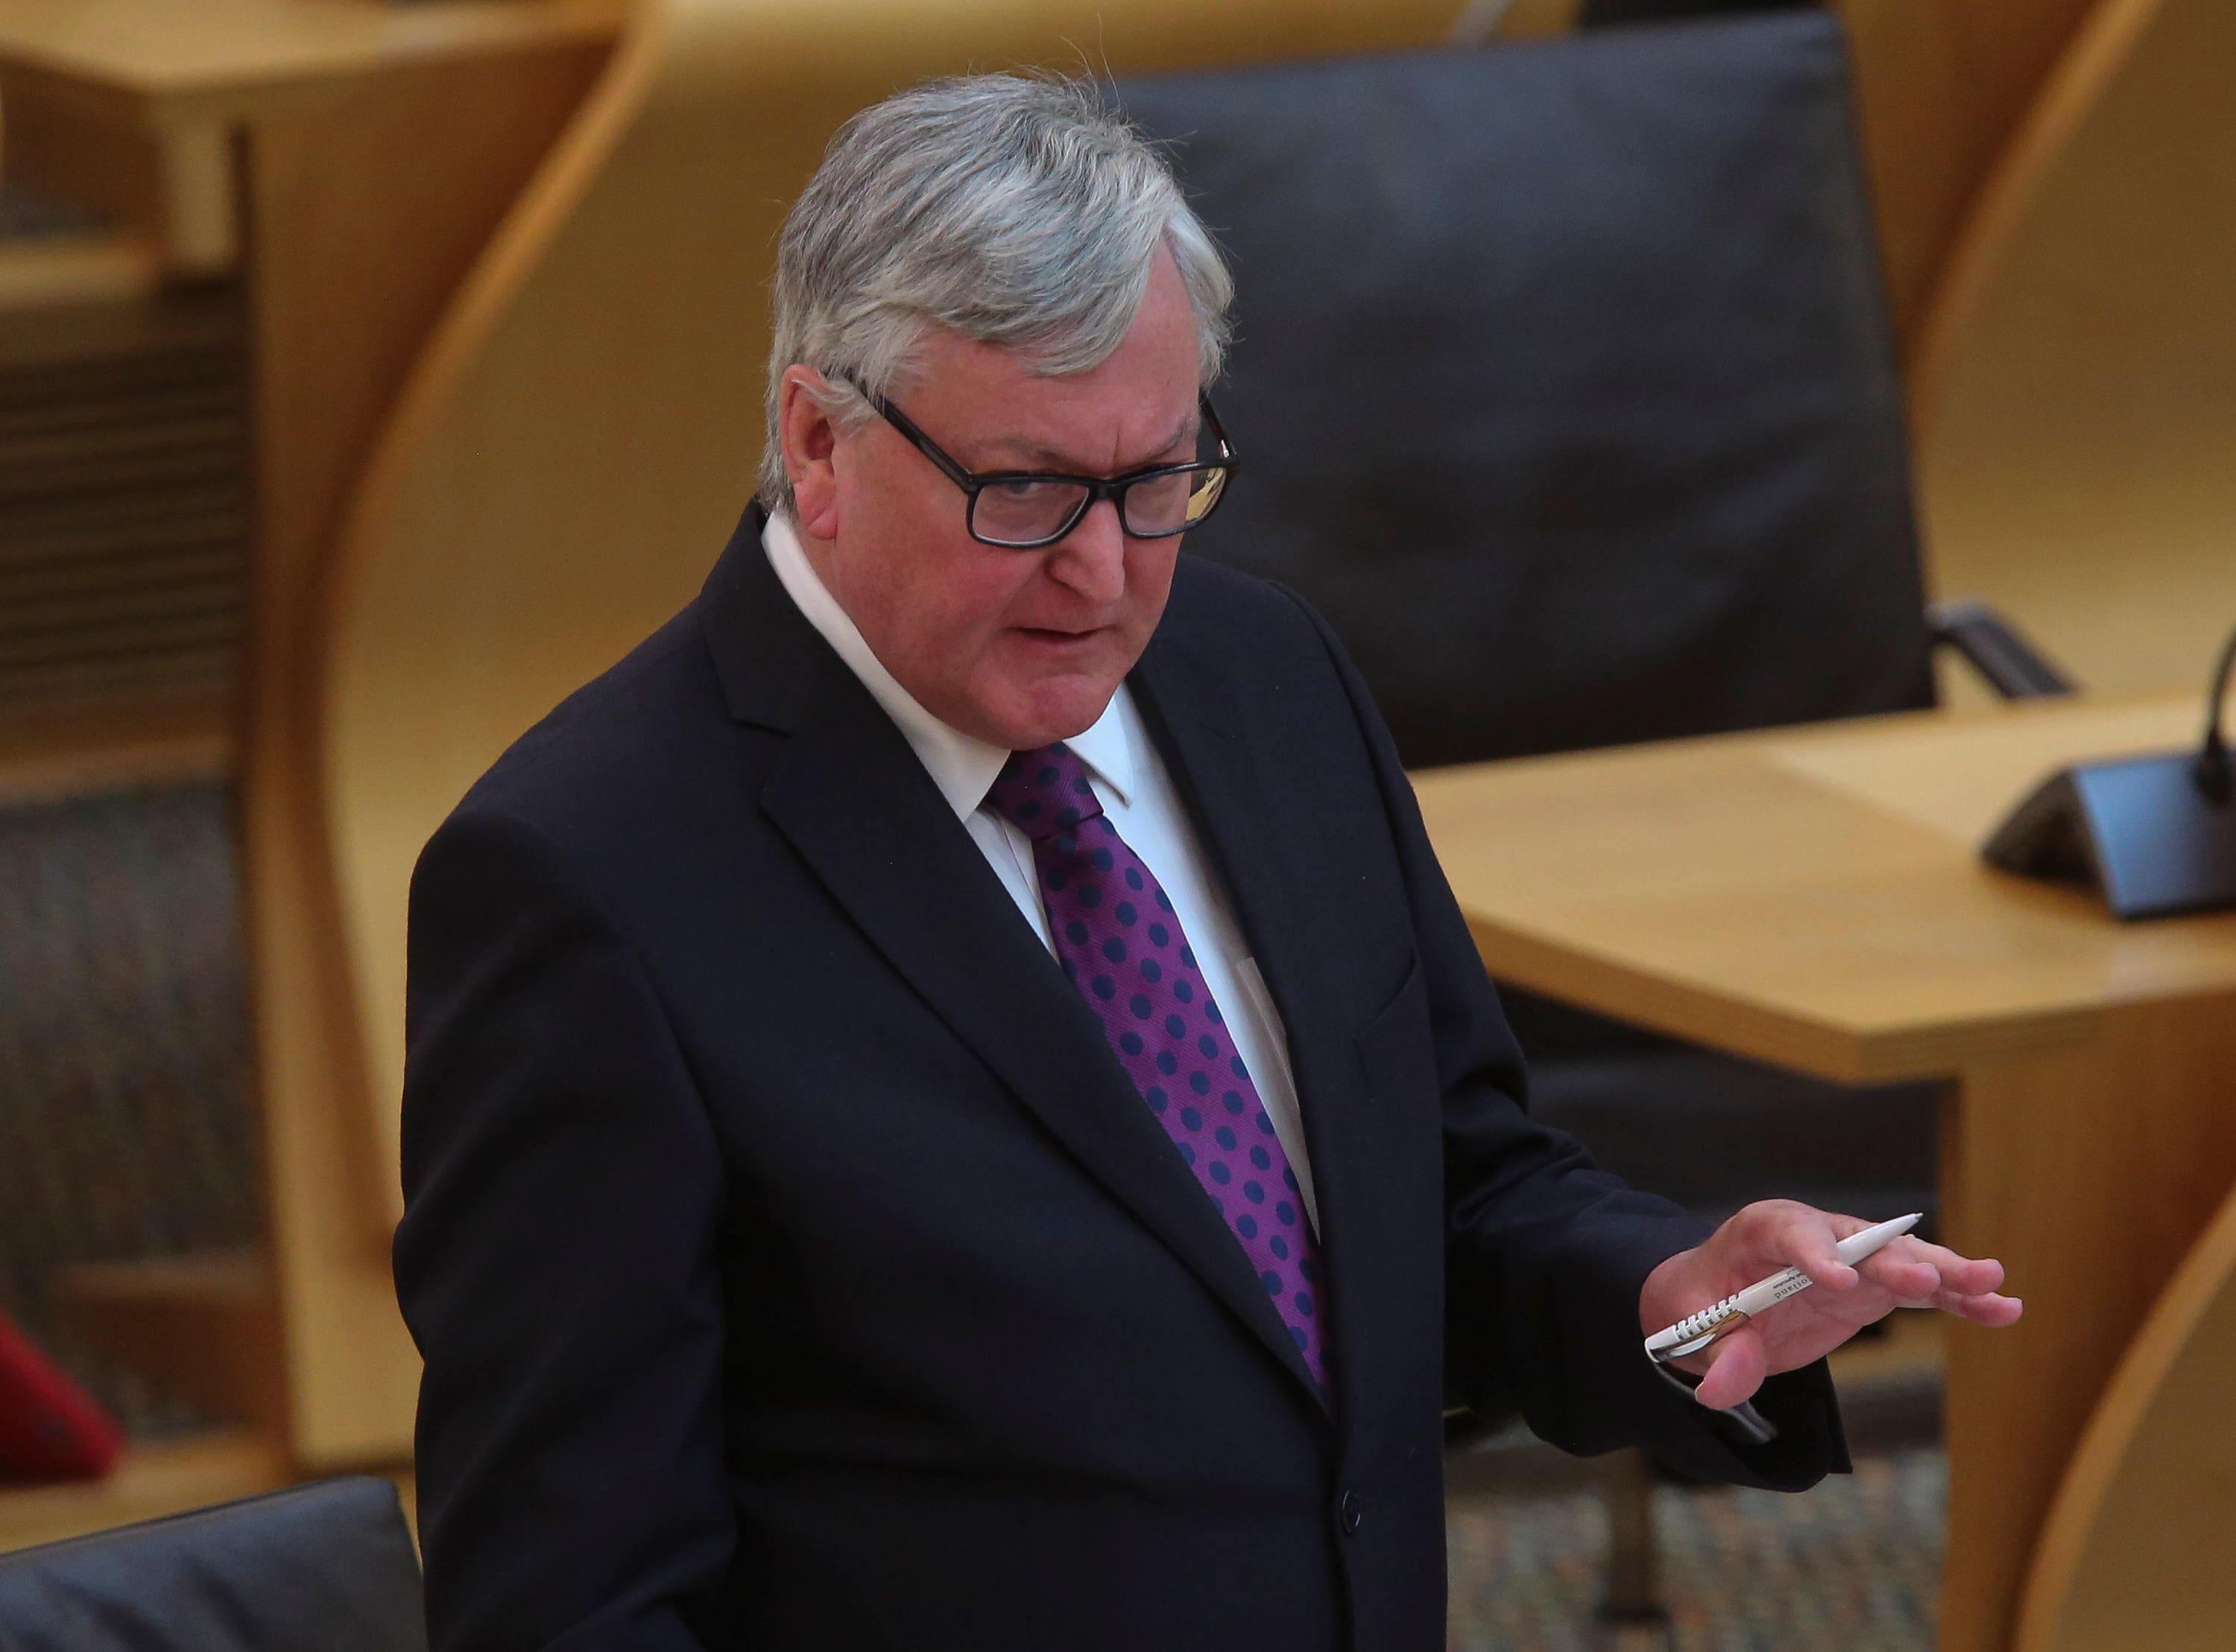 Former minister Fergus Ewing has been a loud critic of the Scottish Government in recent months.